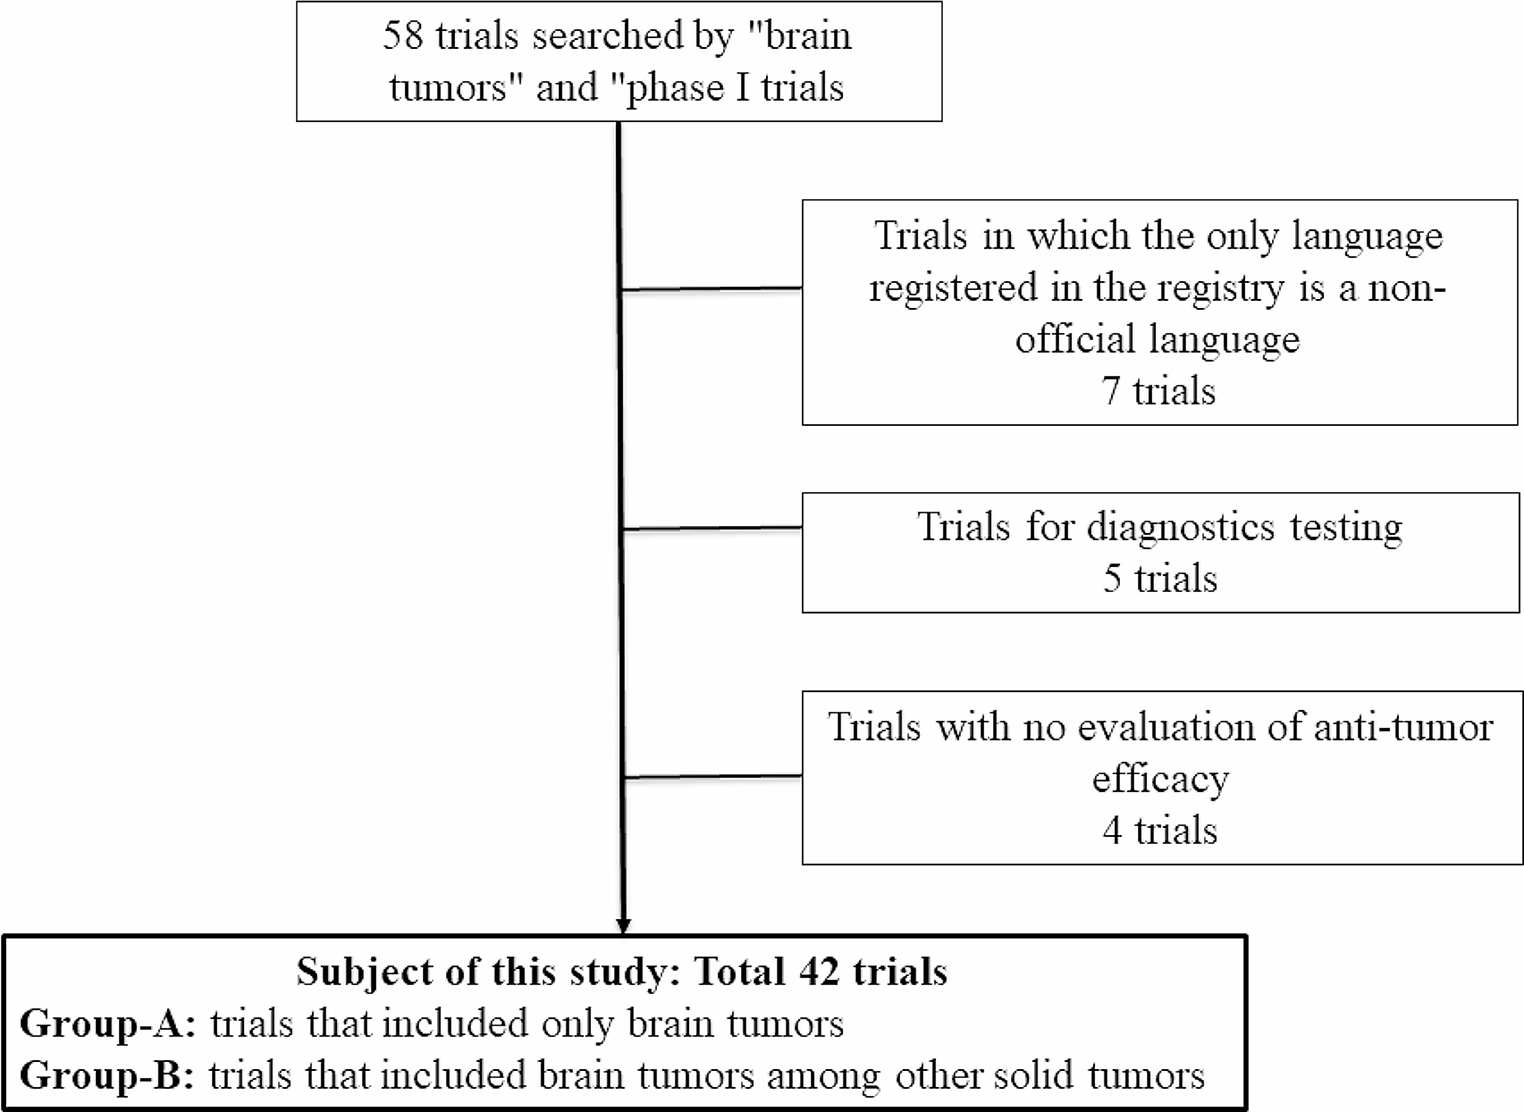 Recent Status of Phase I Clinical Trials for Brain Tumors: A Regulatory Science Study of Exploratory Efficacy Endpoints